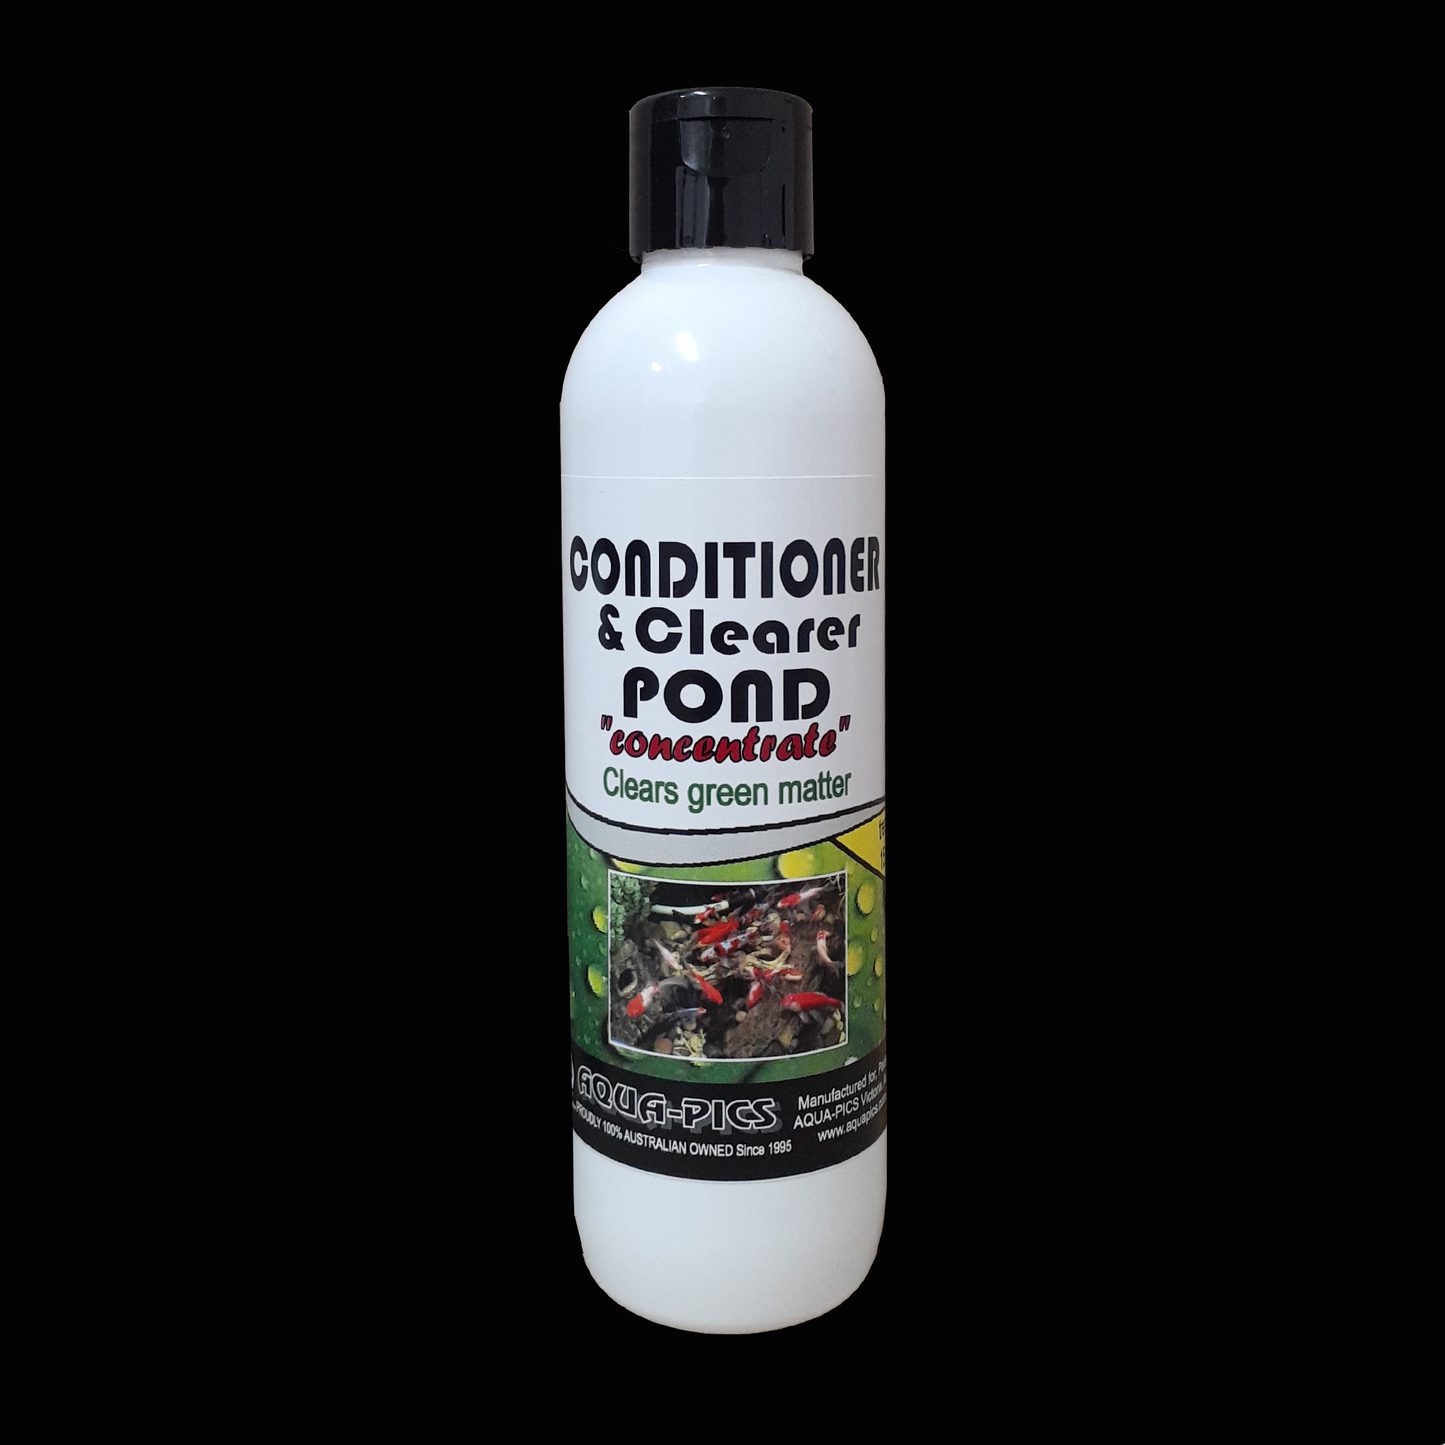 Conditioner & Clearer Pond 250ml